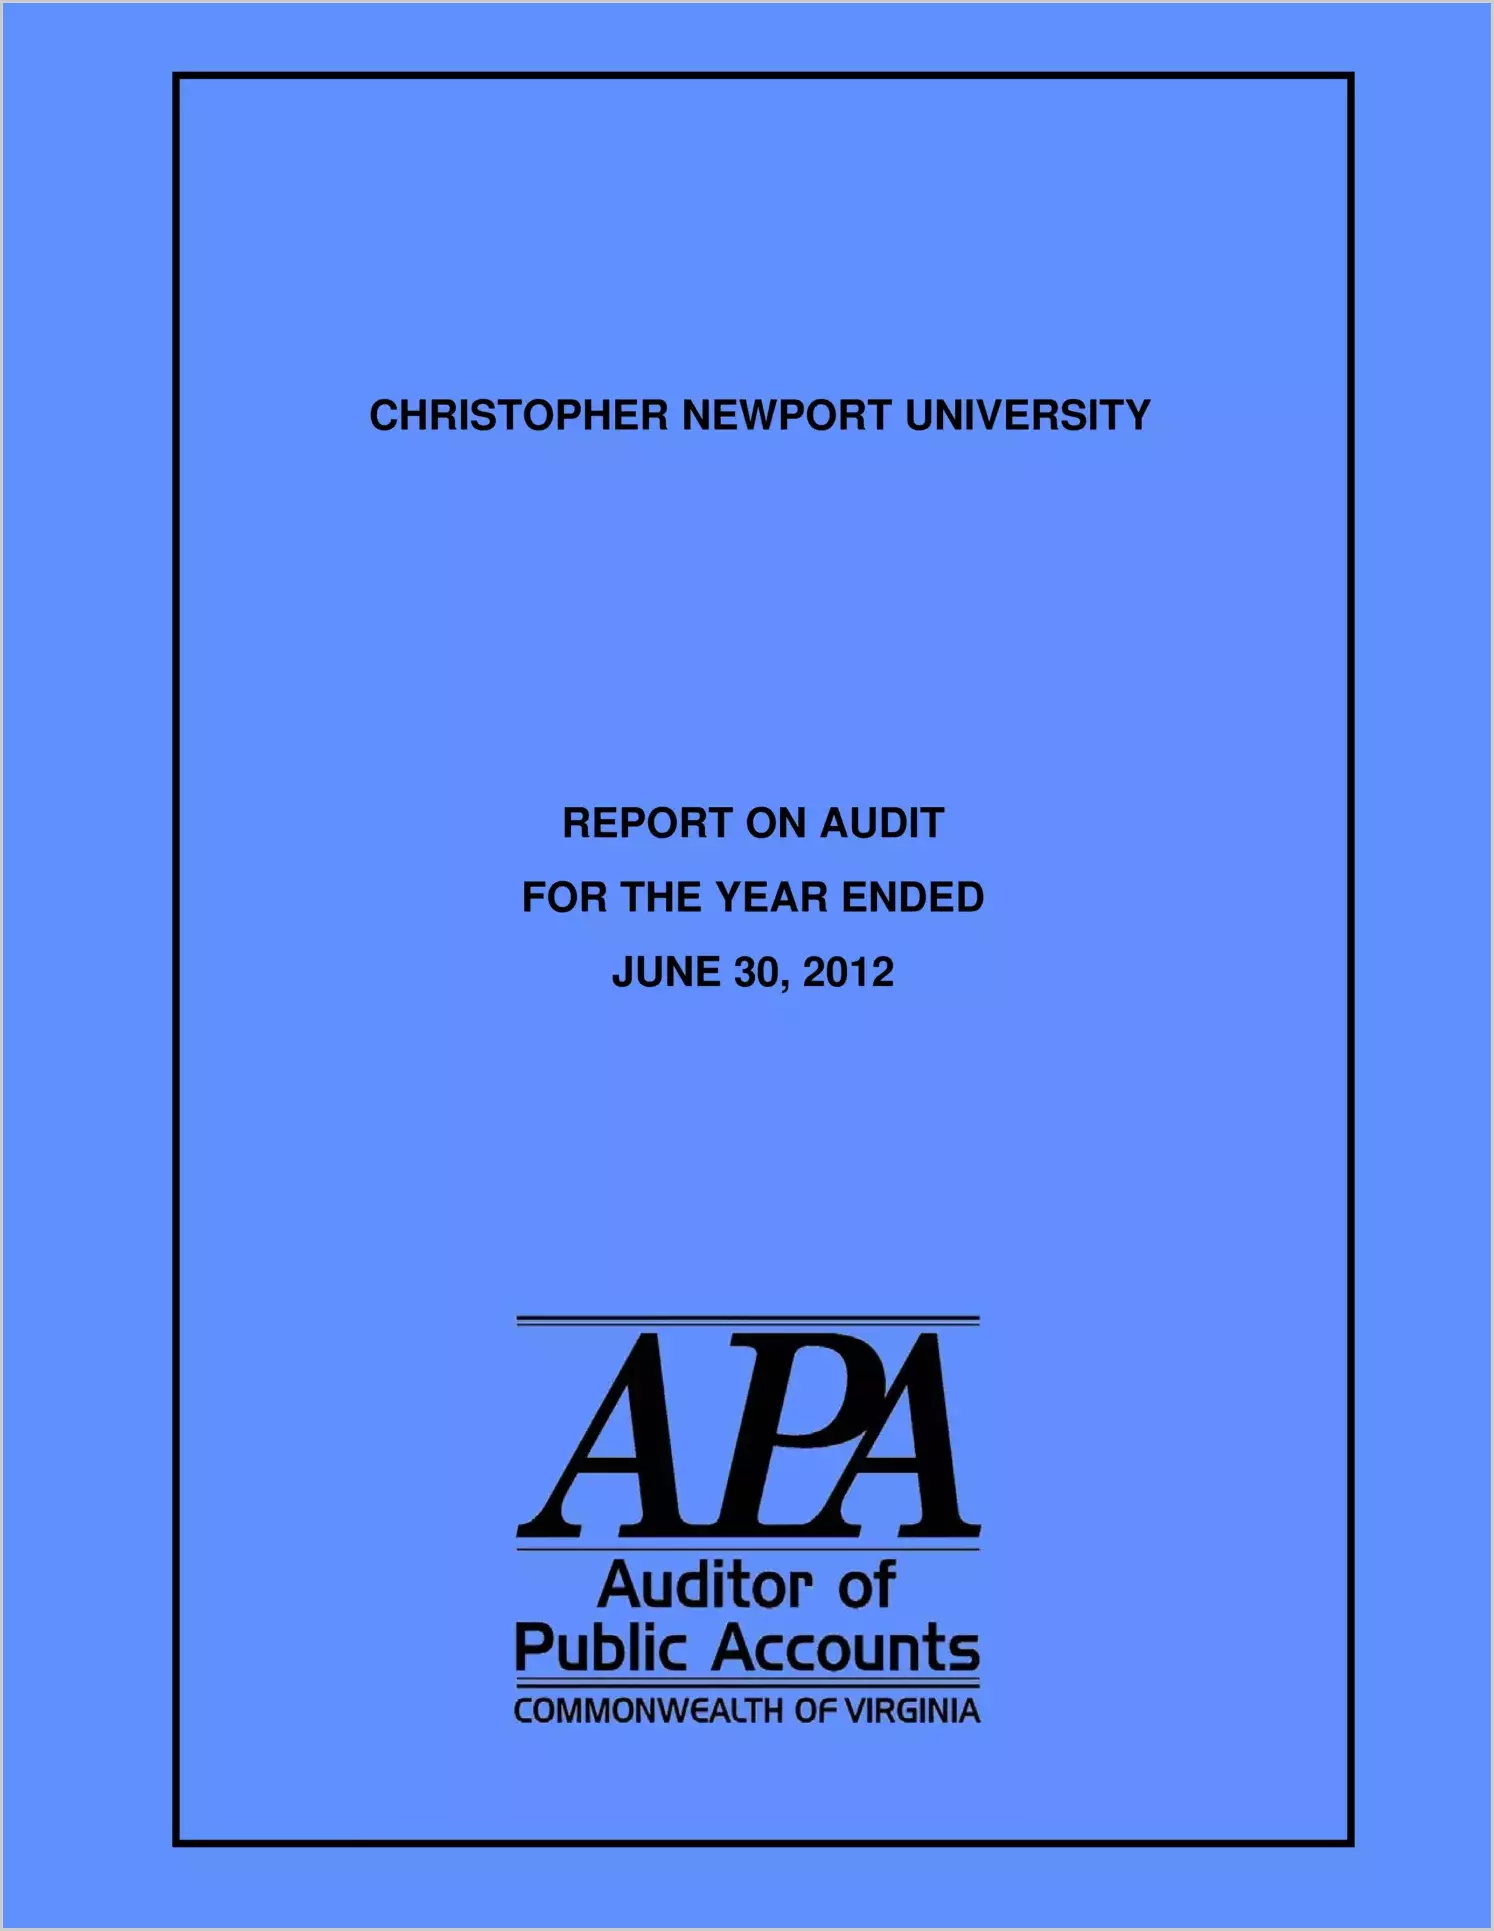 Christopher Newport University for the year ended June 30, 2012